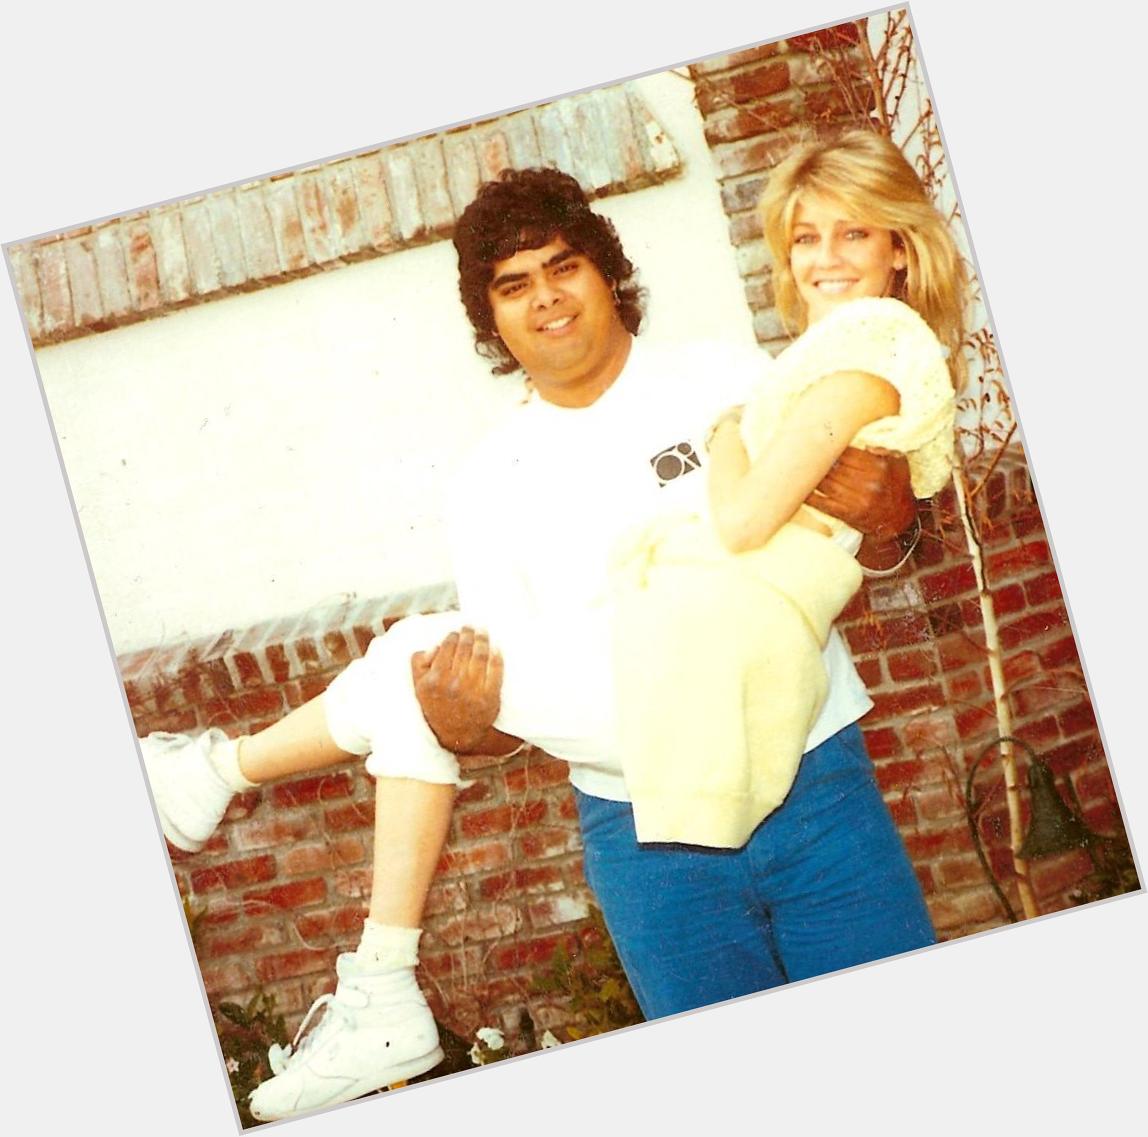  1985 with Heather Locklear, & a very Happy Birthday to her as well 